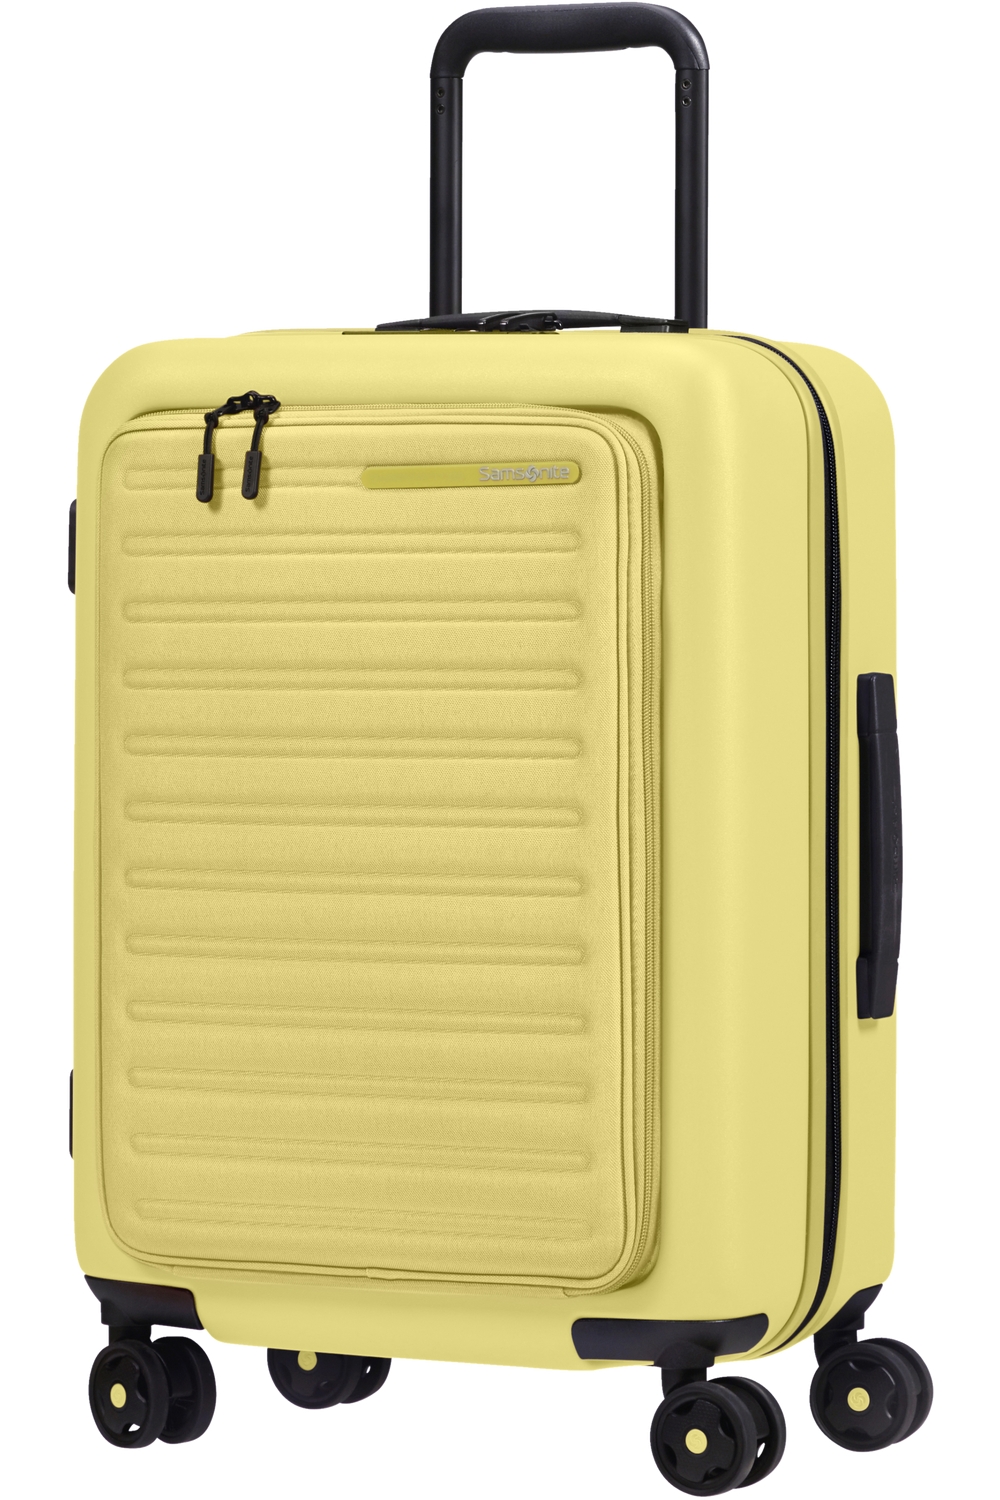 SAMSONITE Kufr StackD Spinner Expander 55/20 Easy Access Cabin Pastel Yellow, 23 x 40 x 55 (135418/1661)